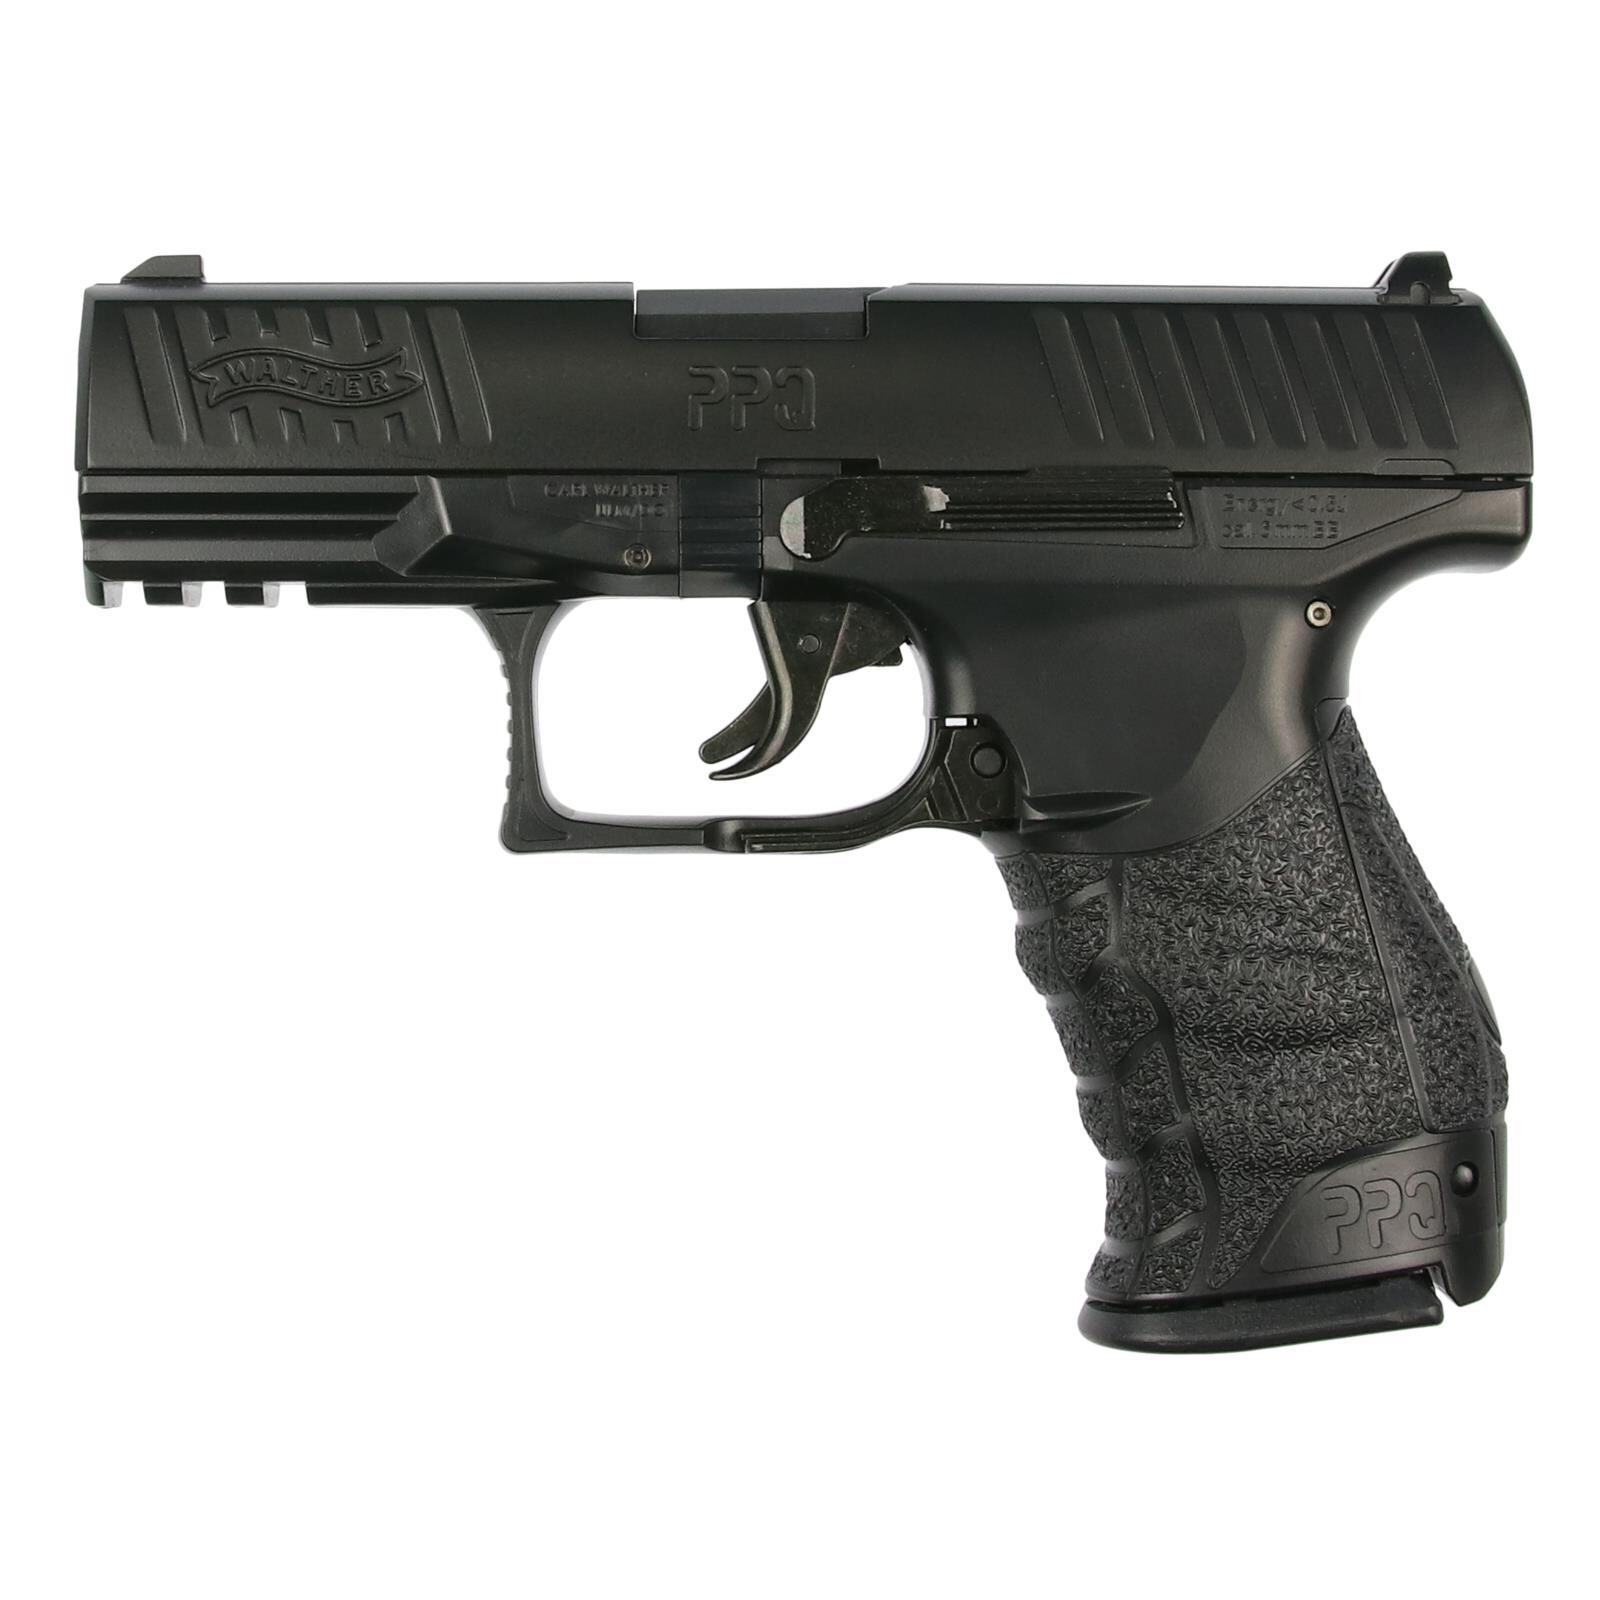 Softair - Pistole - WALTHER PPQ HME (Heavy Metal Energy) - ab 14, unter 0,5 Joule